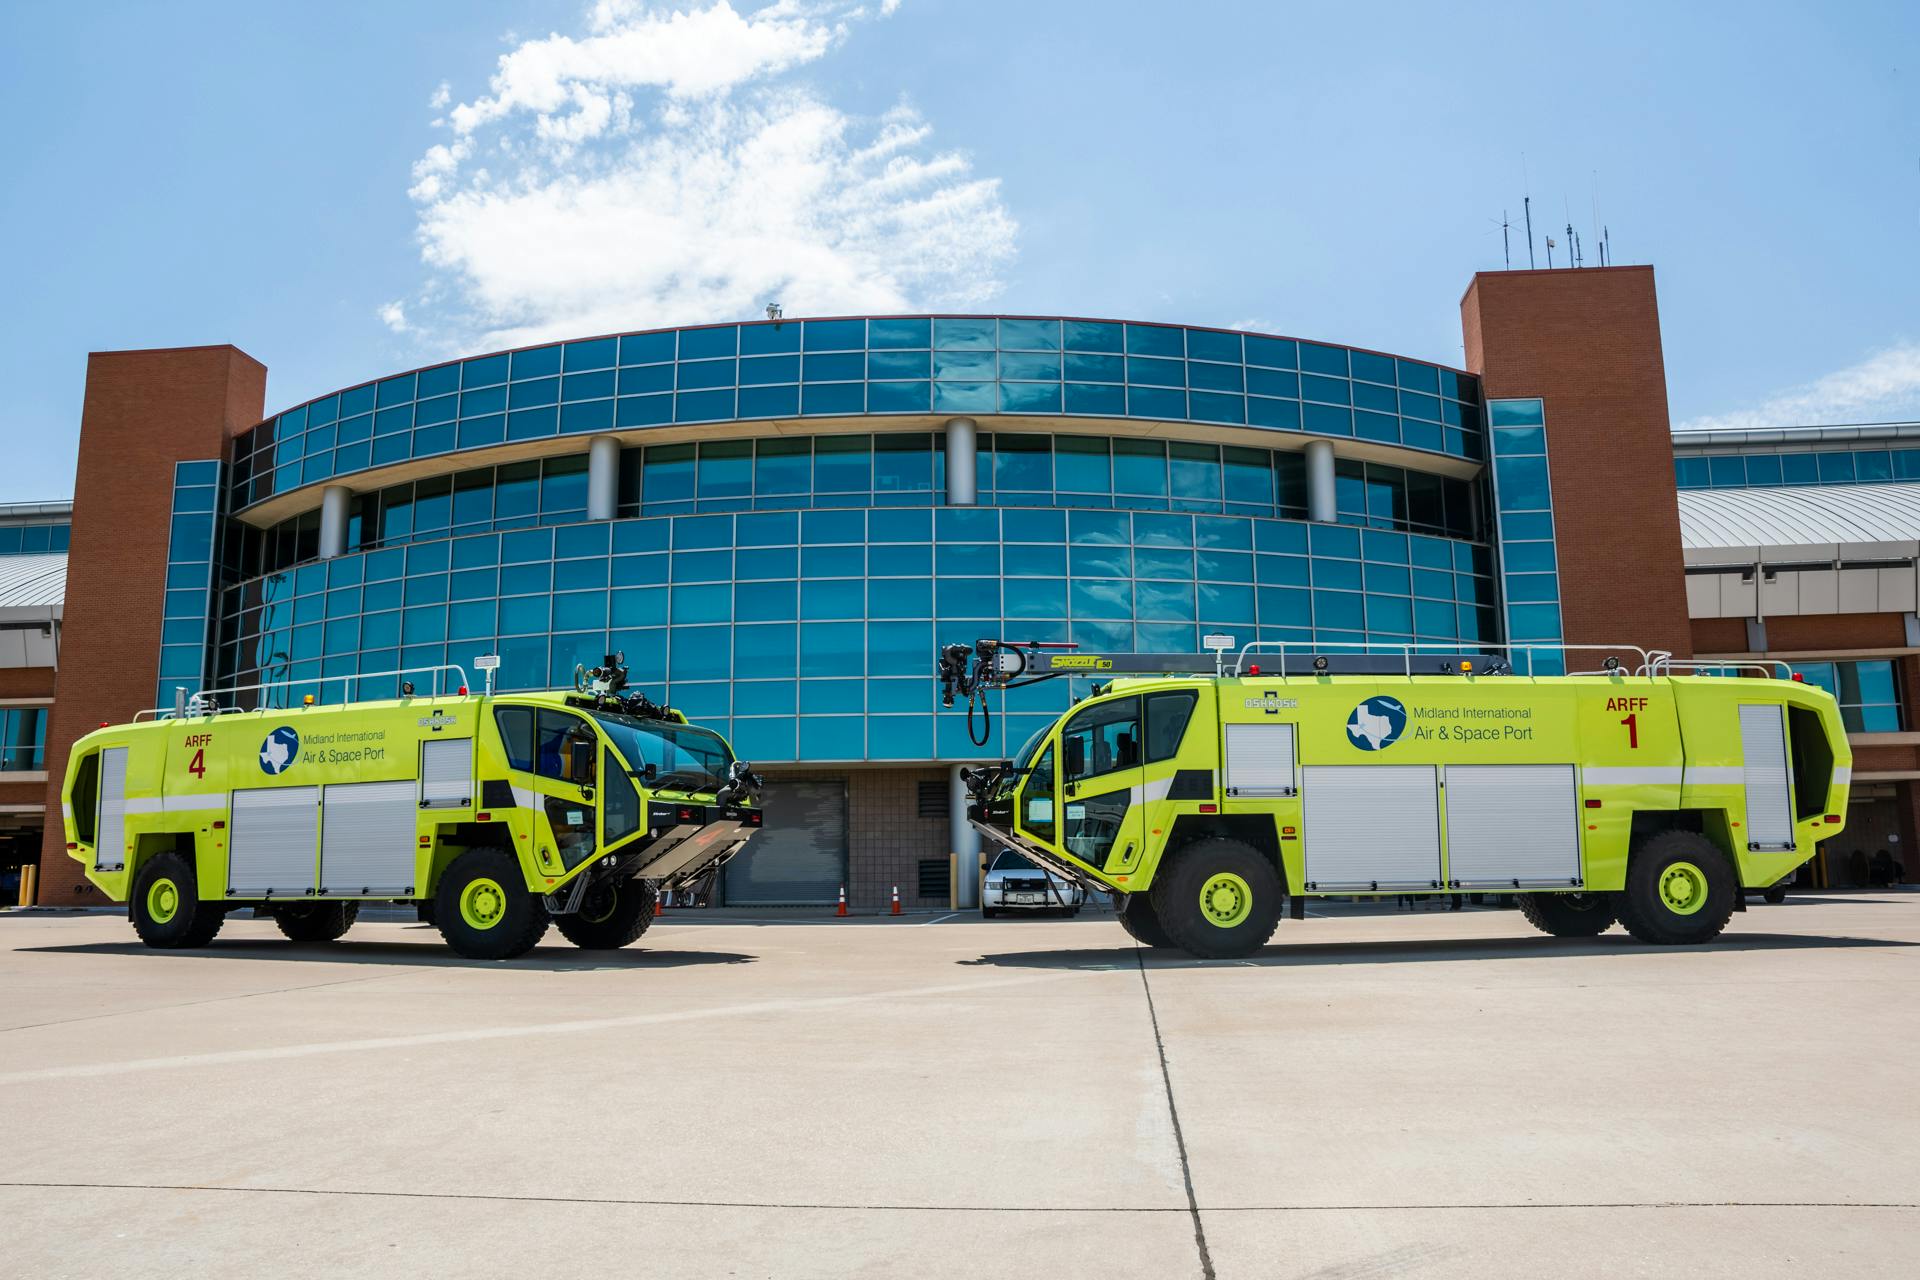 Midland International Air and Space Port Receives New FAA Class 4 Aircraft Rescue and Fire Fighting Vehicles